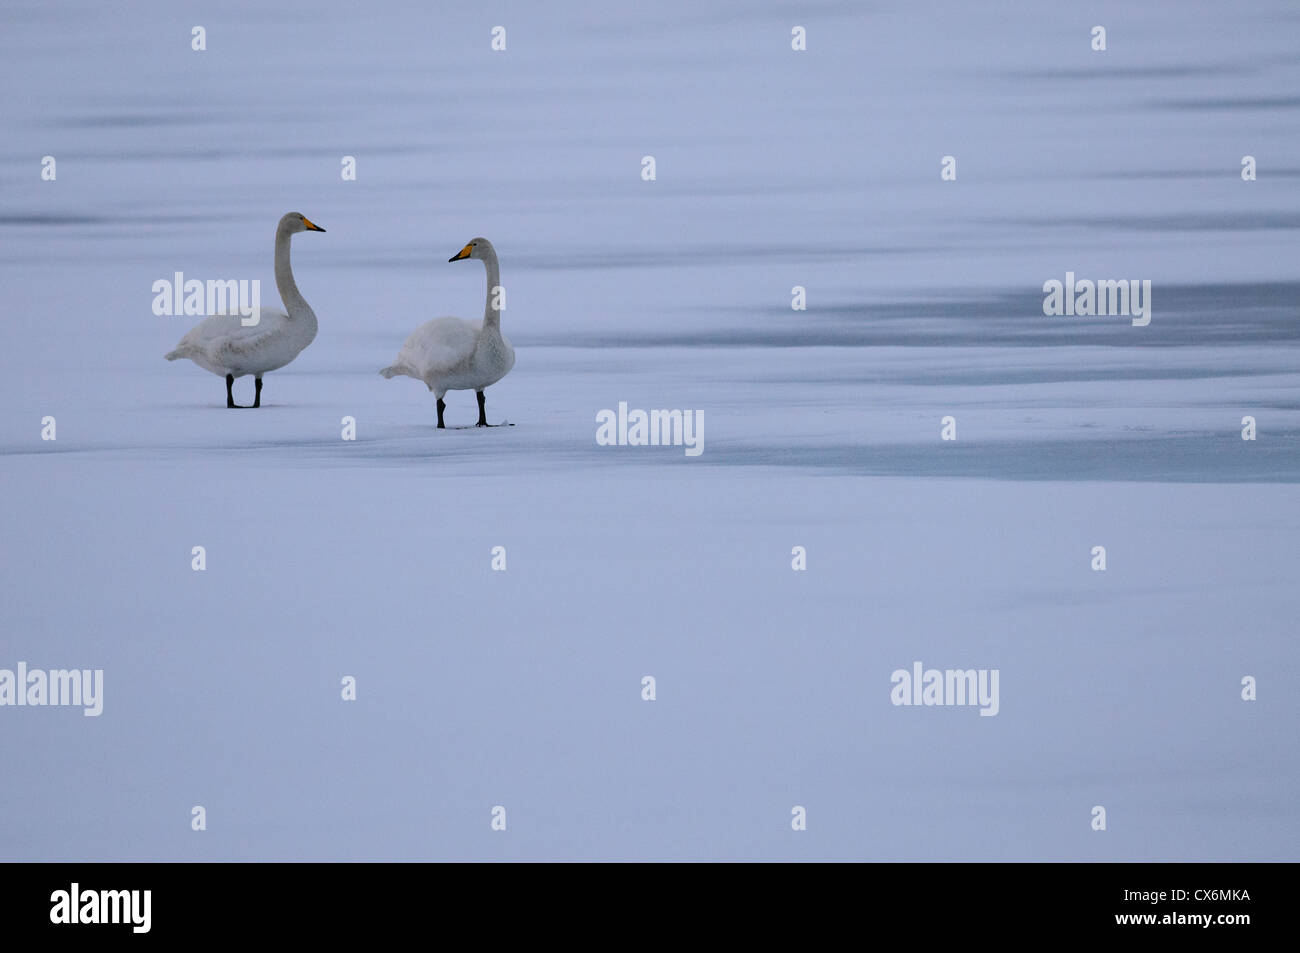 Pair of Whooper swans on ice on a frozen lake in Finland Stock Photo